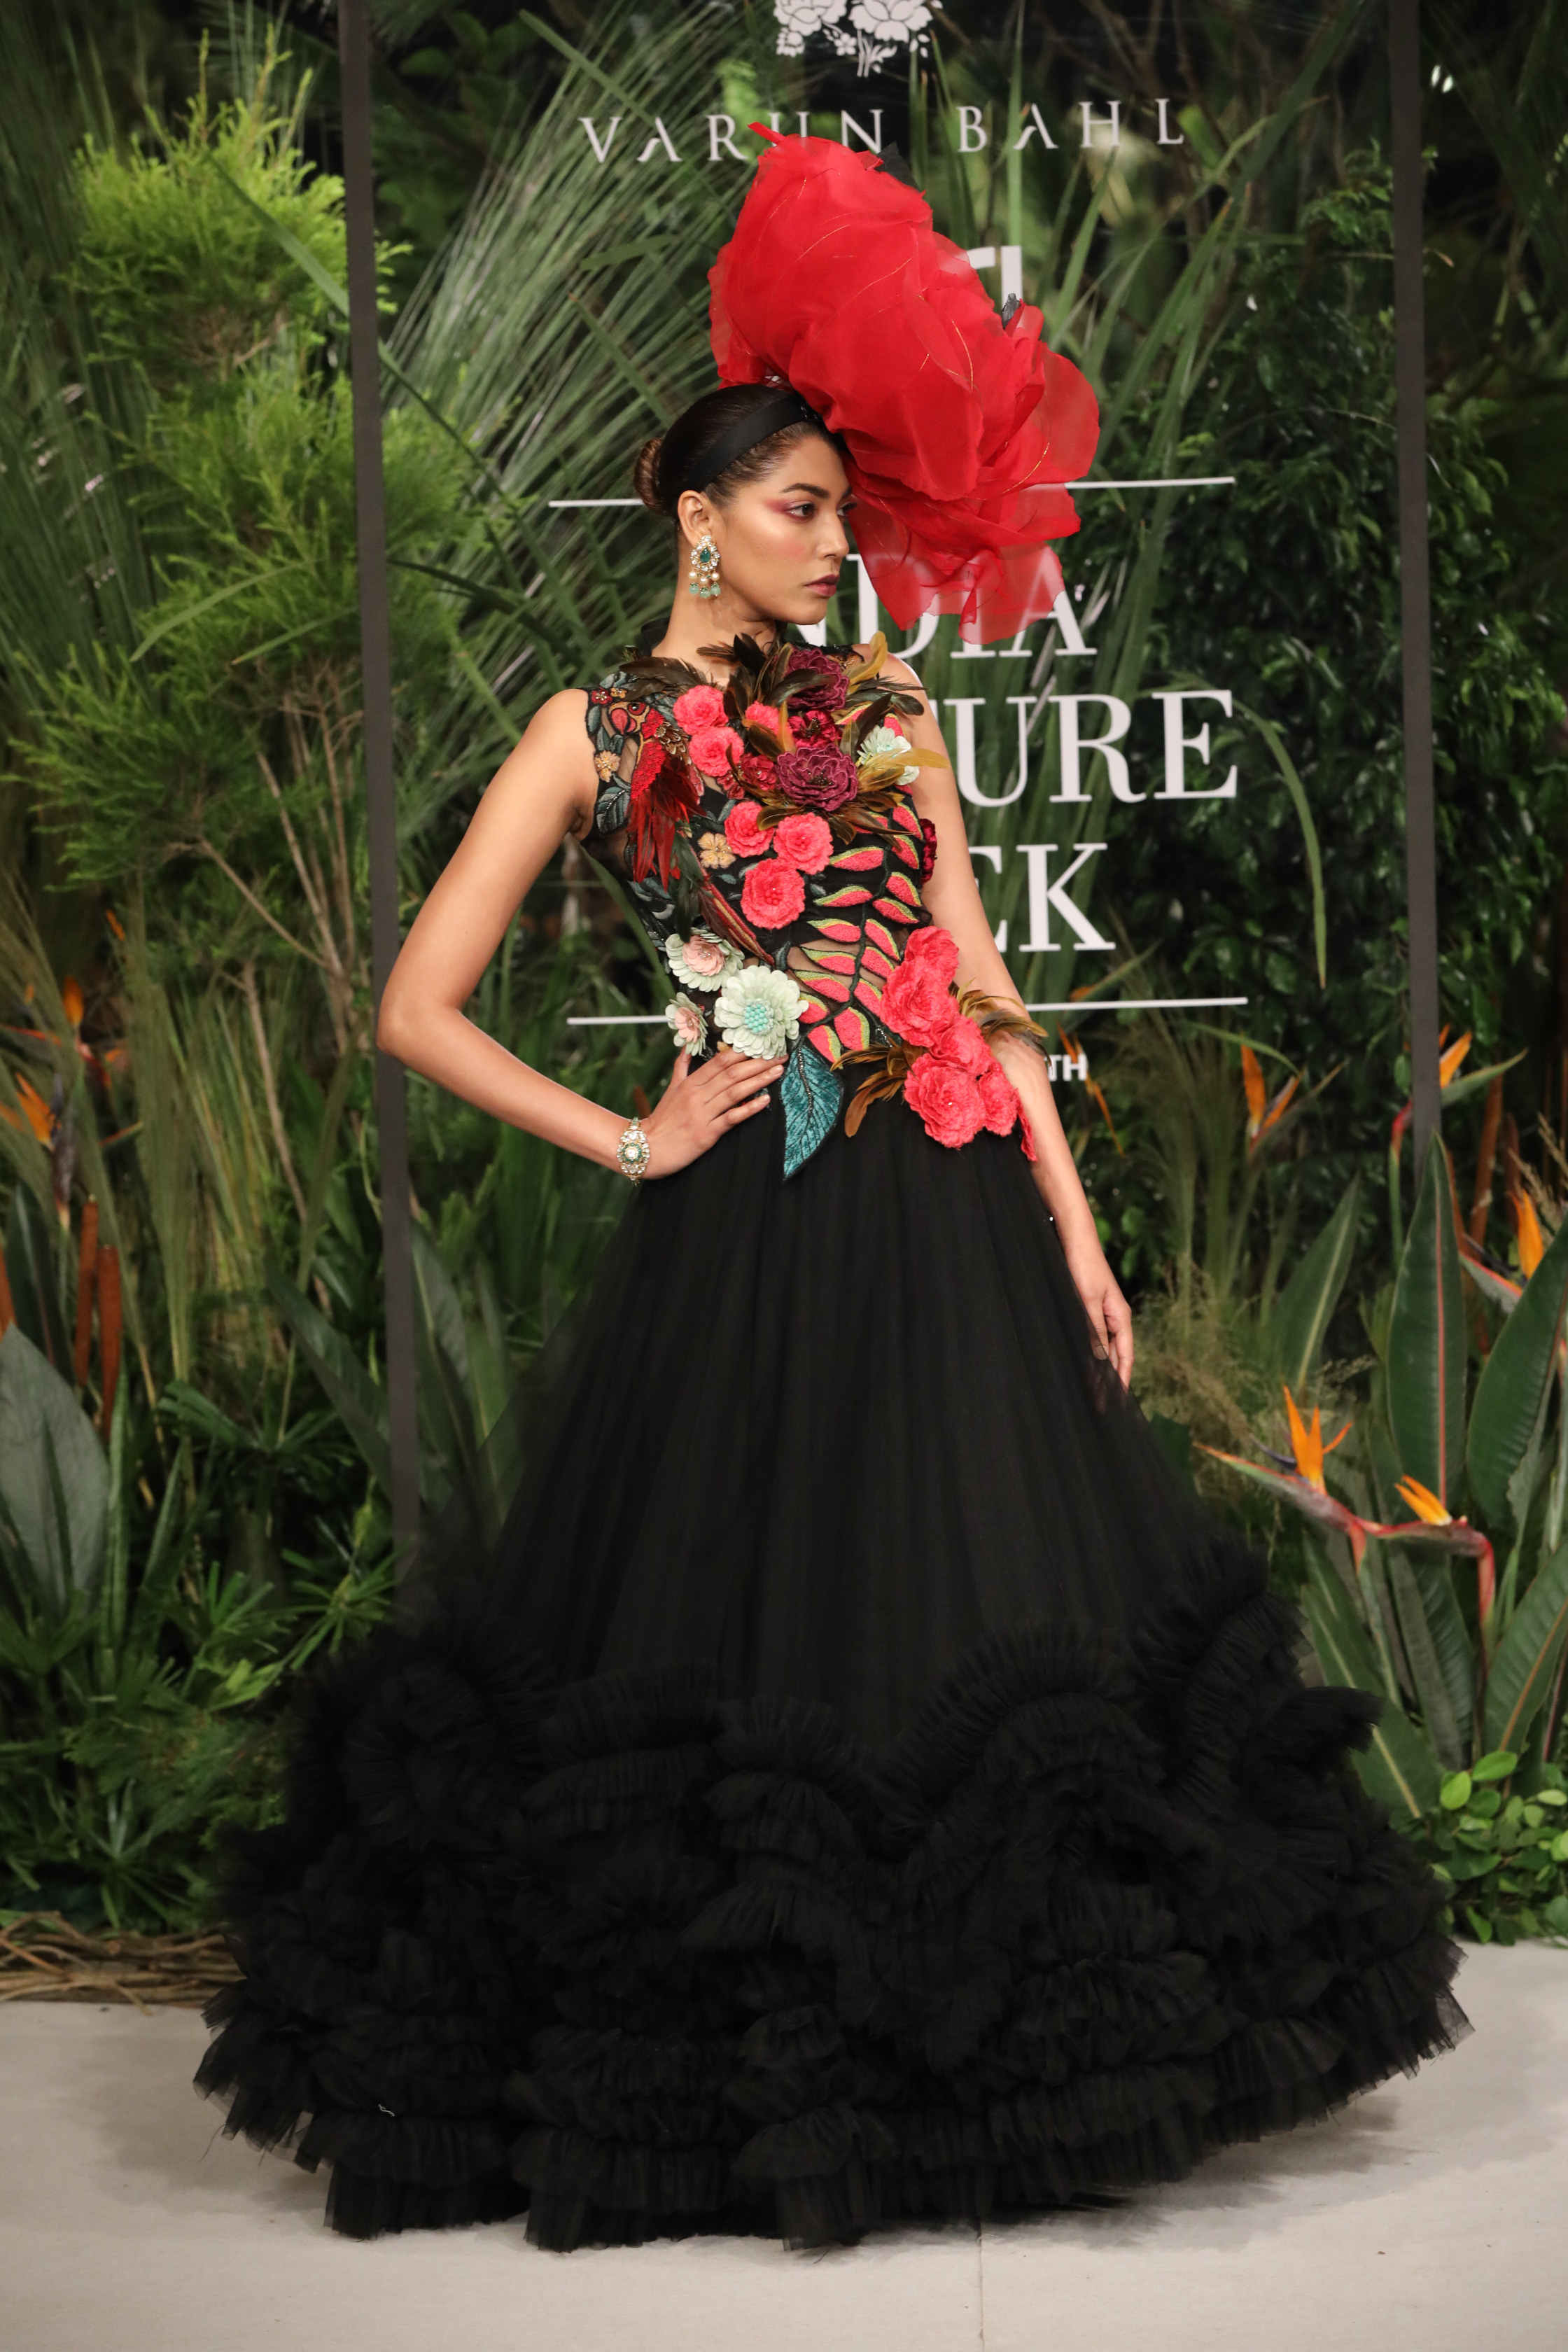 Black Tulle Accessory Top With Ruffle Skirt